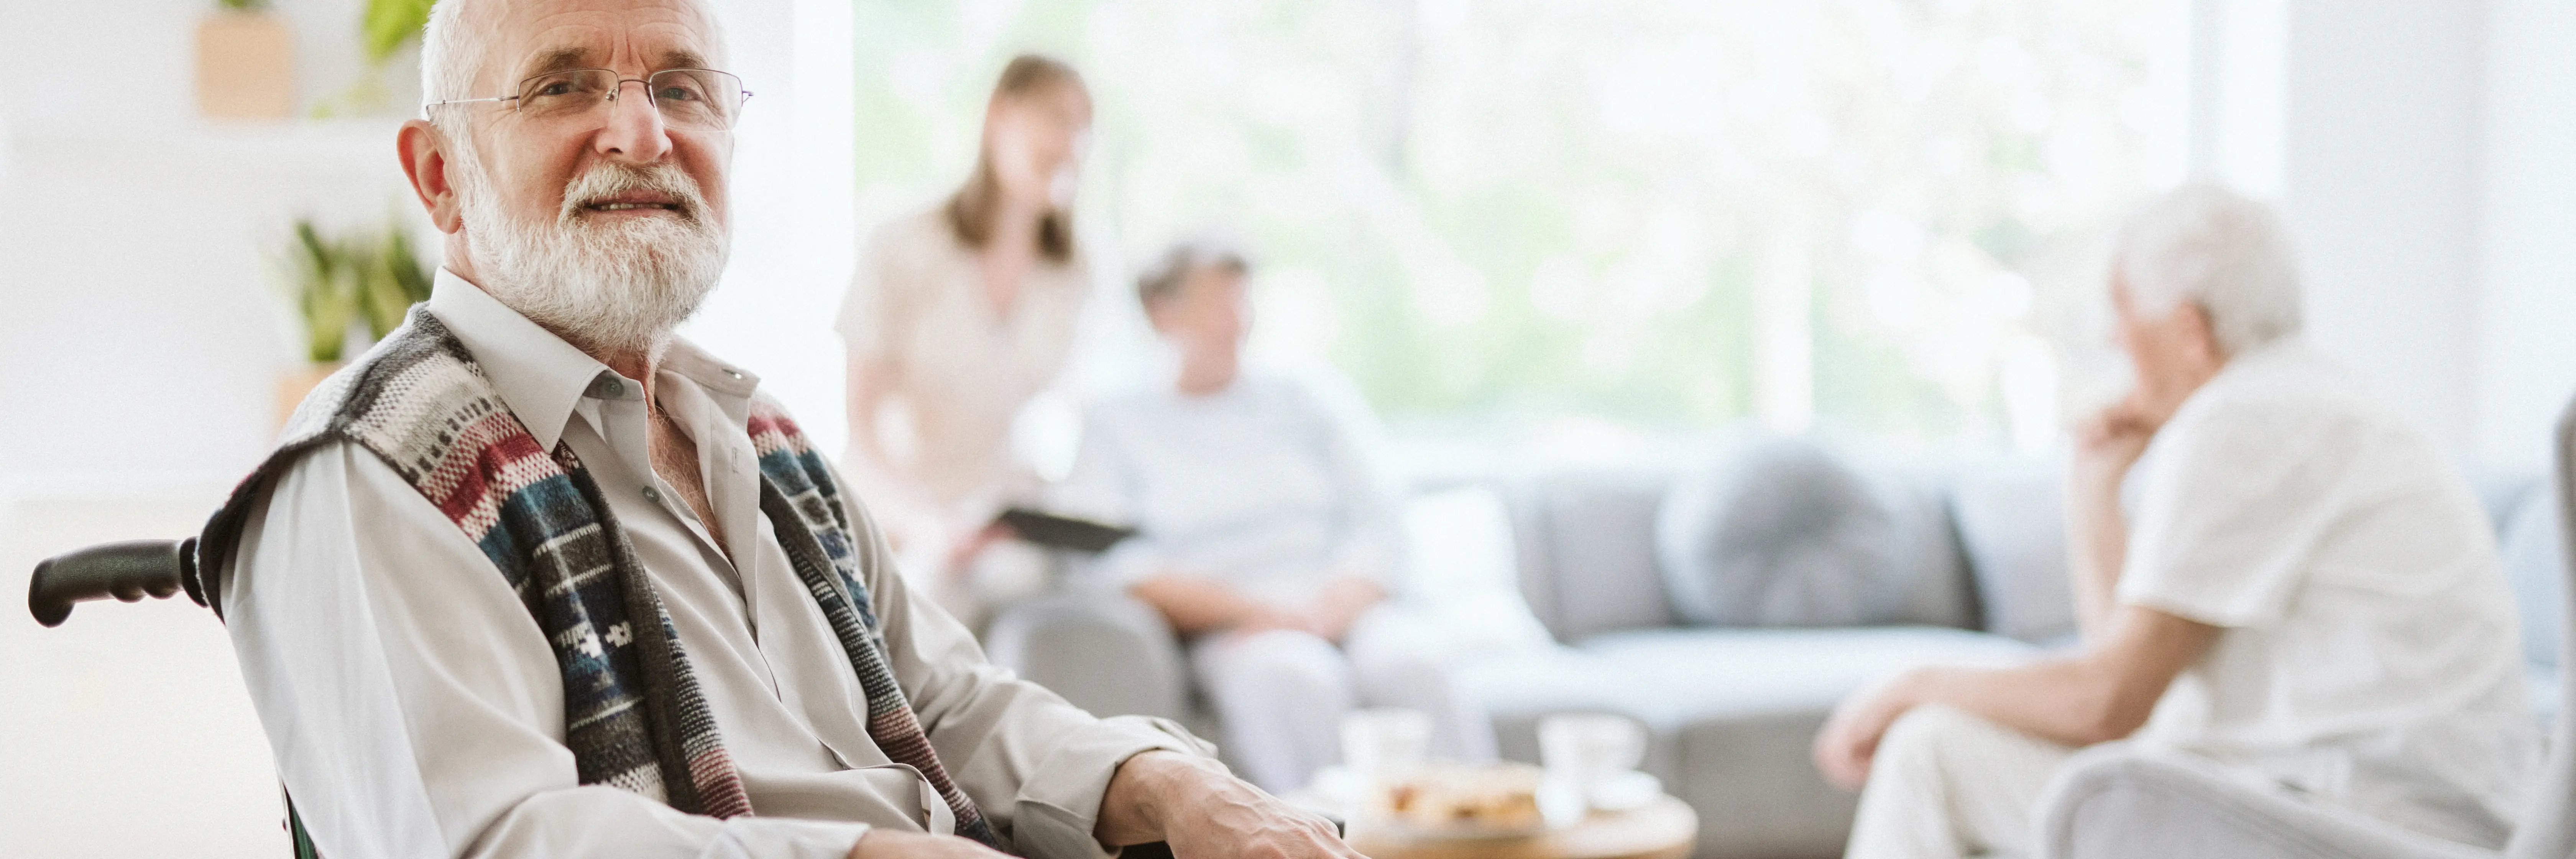 Assisted Living vs Memory Care: Comparing The Differences